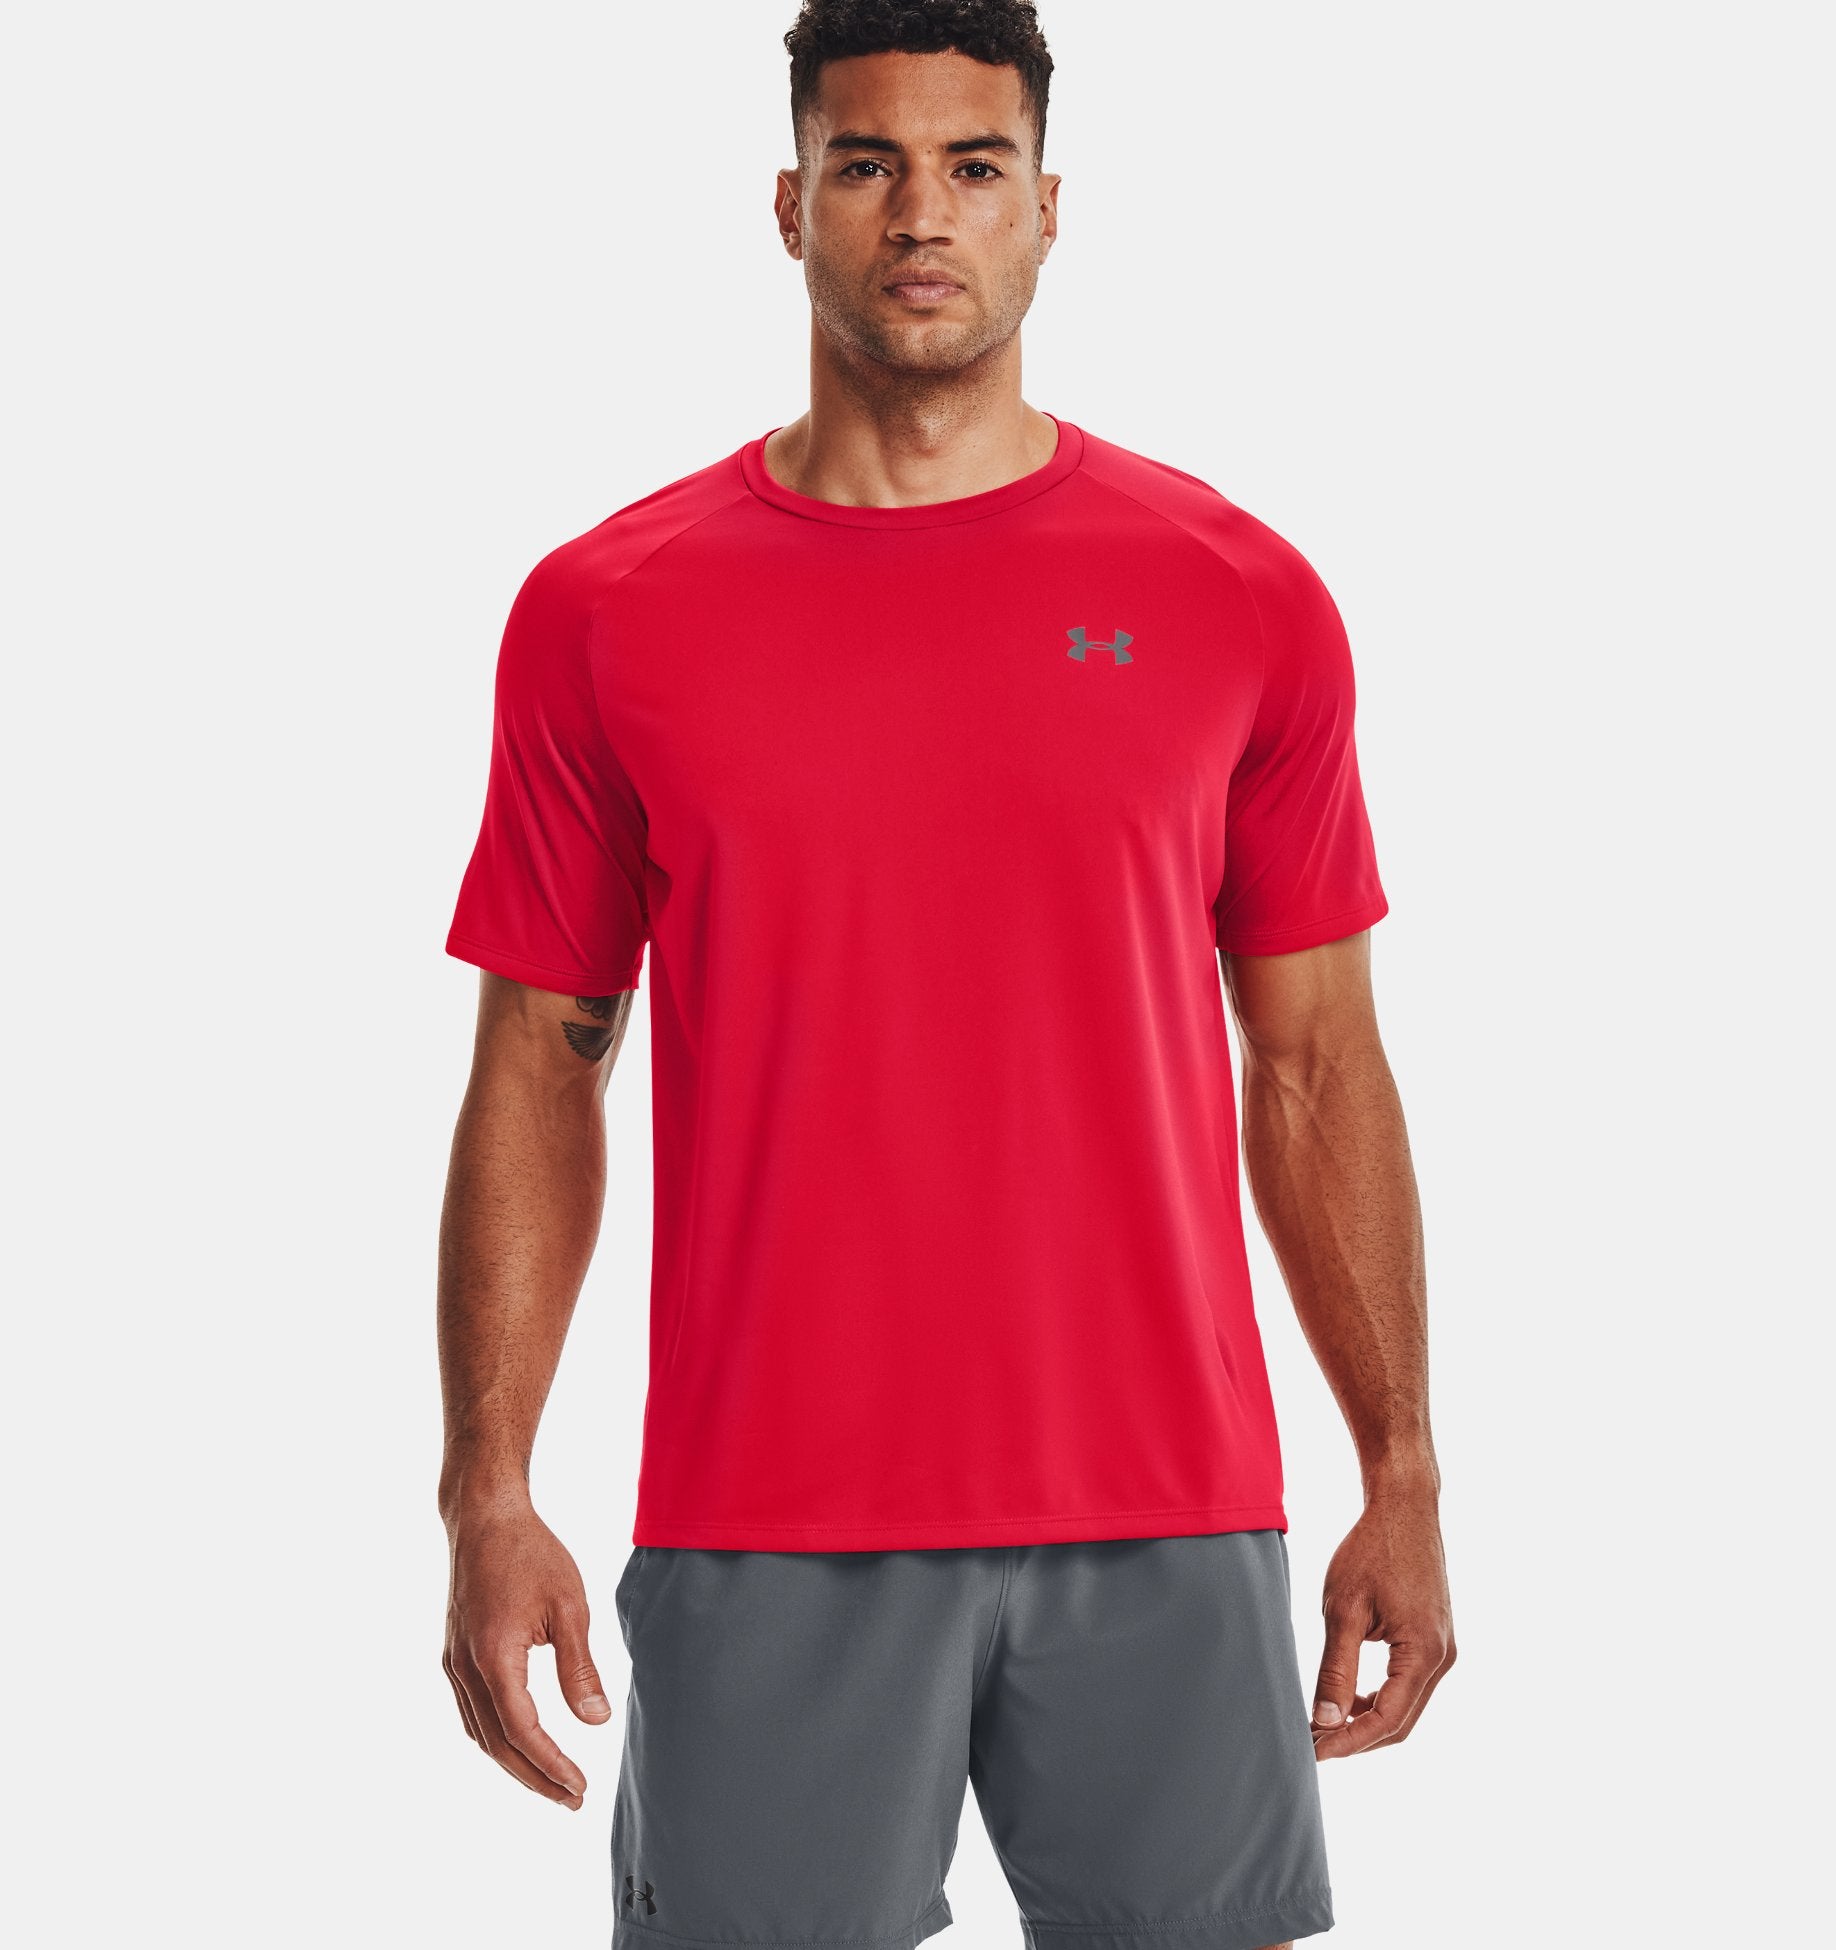 Under Armour Men's Tech 2.0 SS Tee Apparel Under Armour Red/Graphite-600 Small 